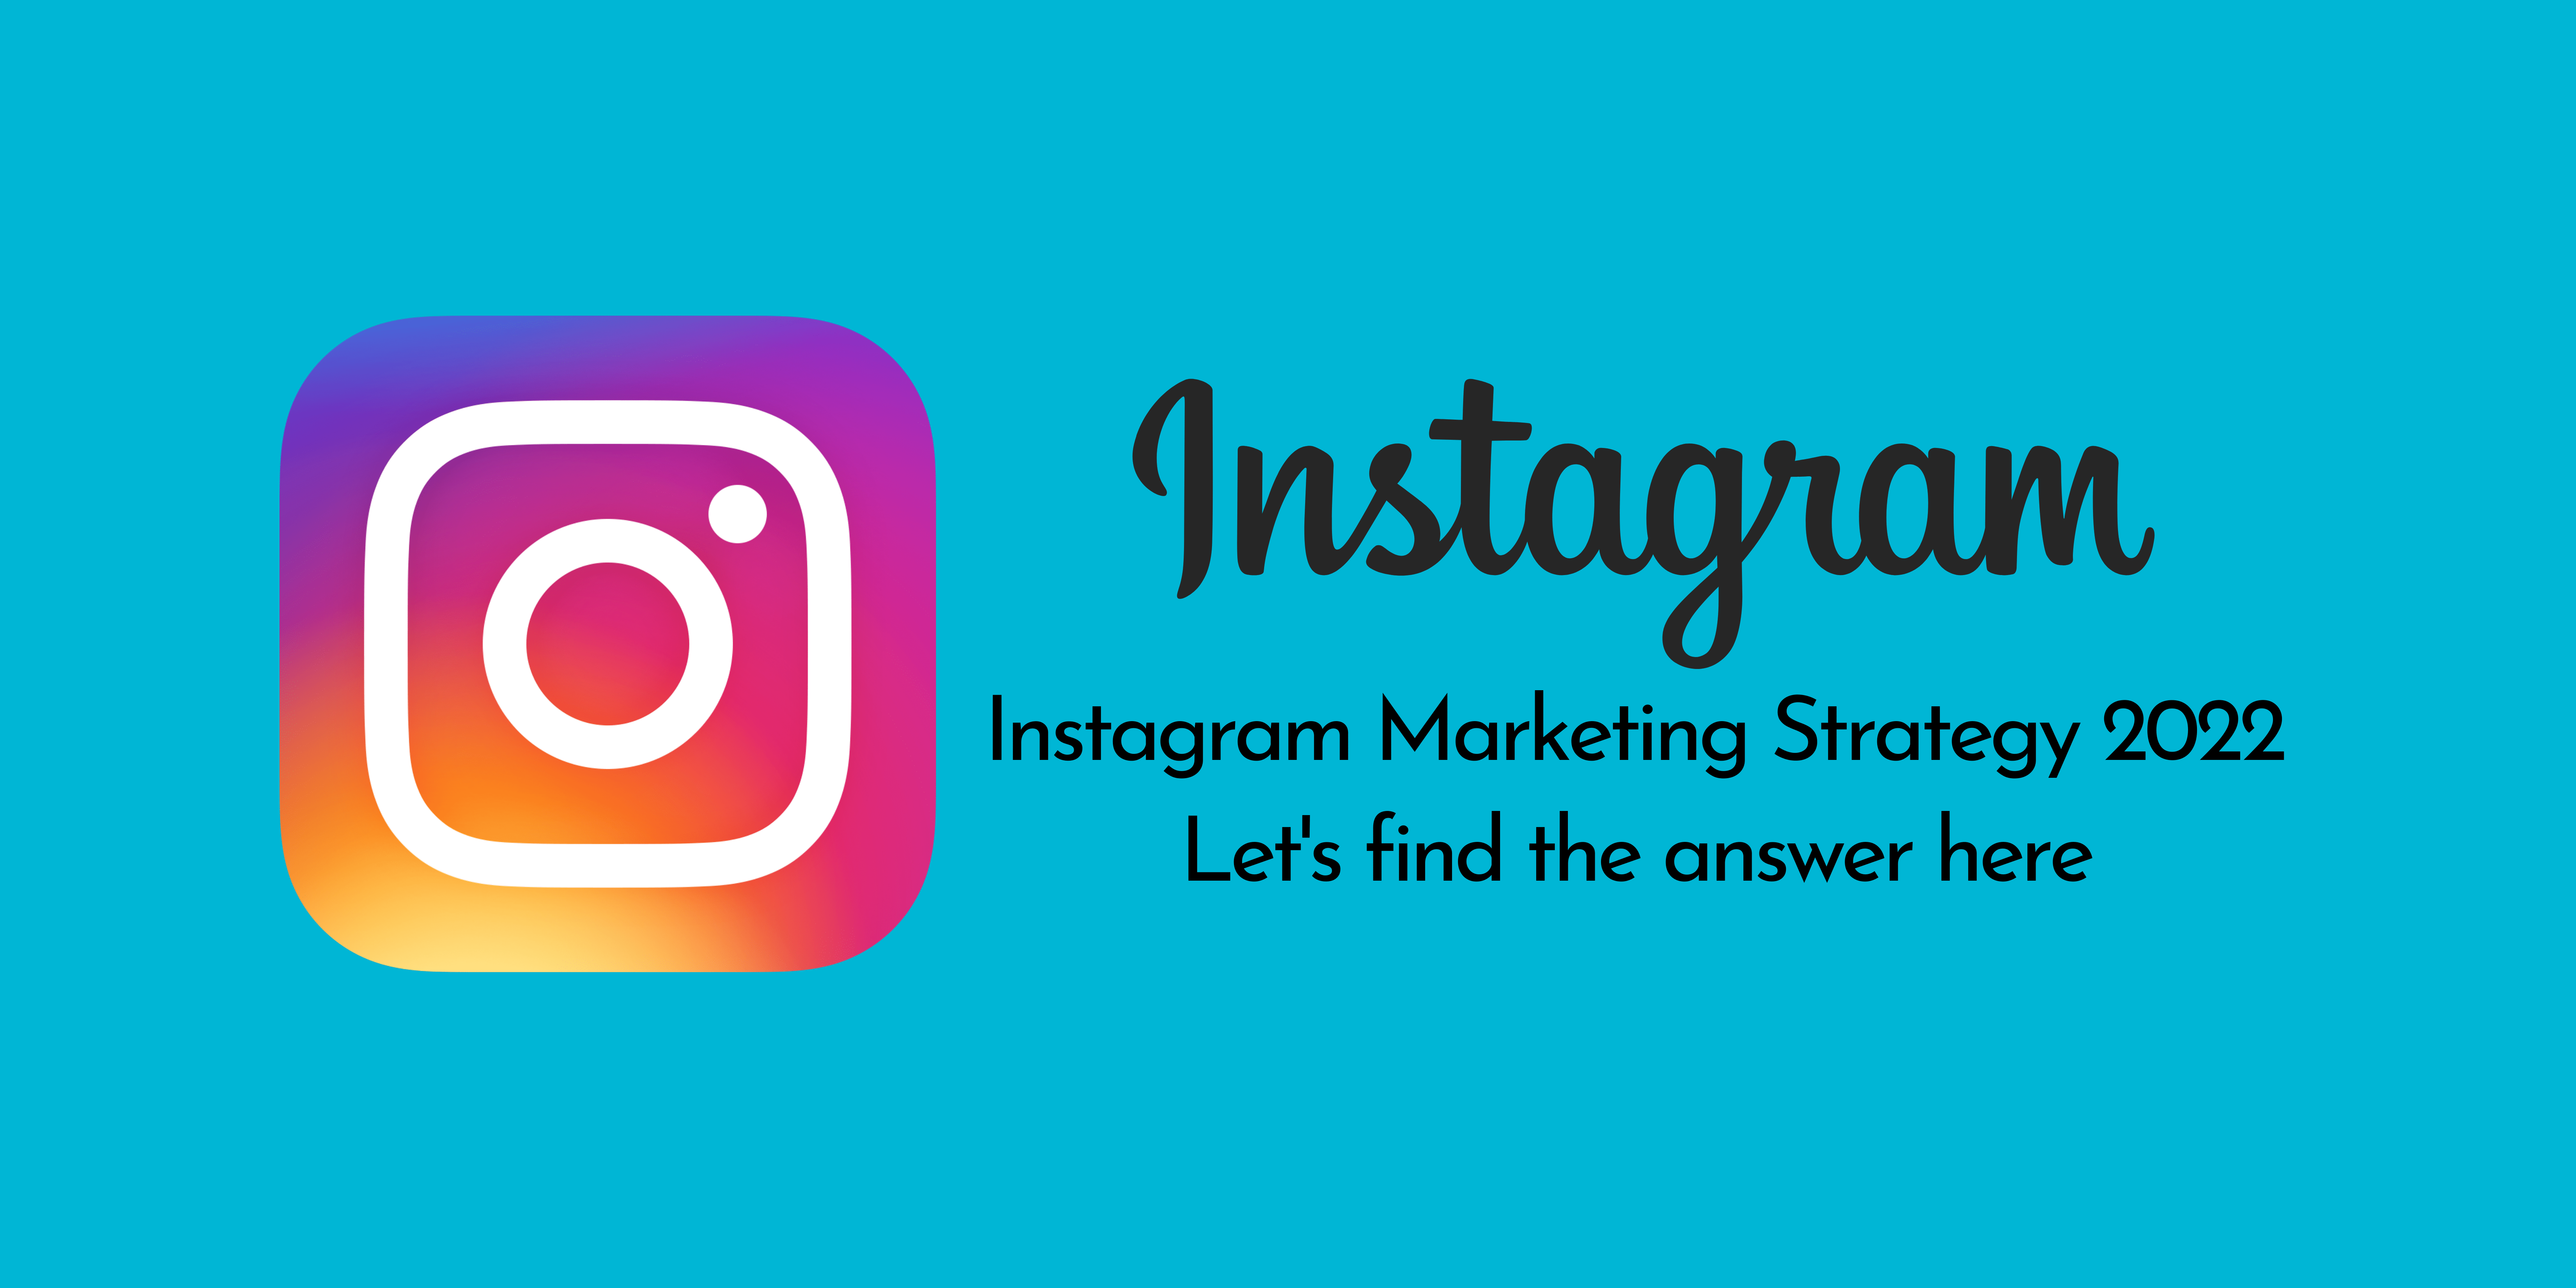 Instagram Marketing Strategy, how instagram marketing agency in Delhi could help you